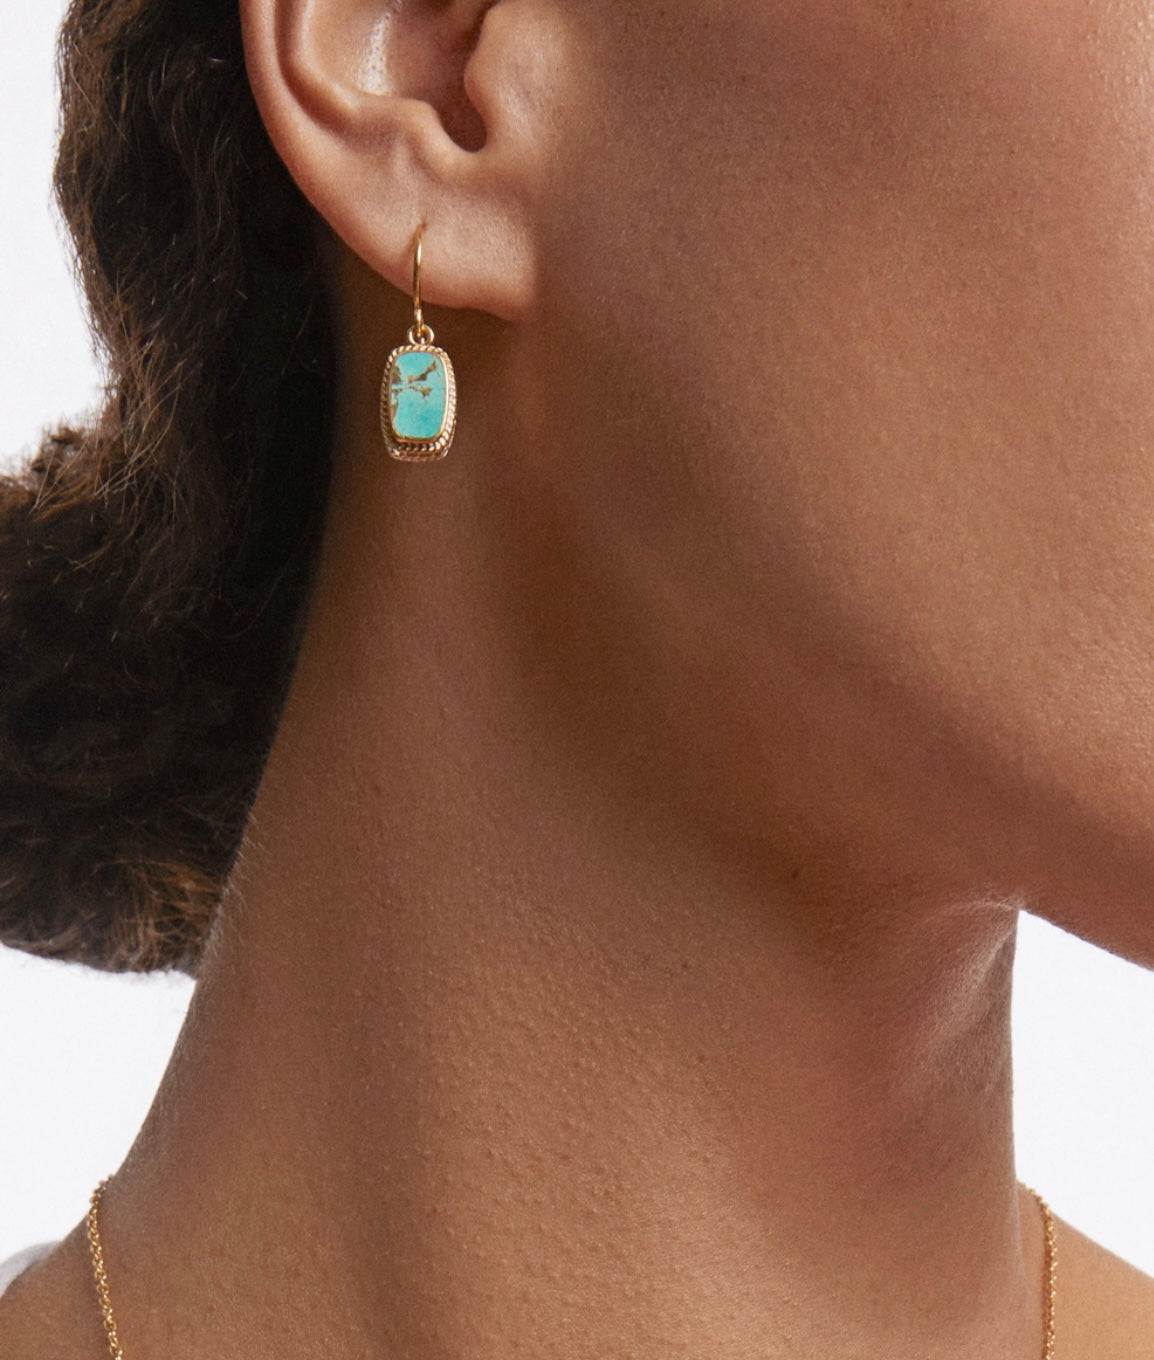 Anna Beck Turquoise Cushion Drop earrings- Gold